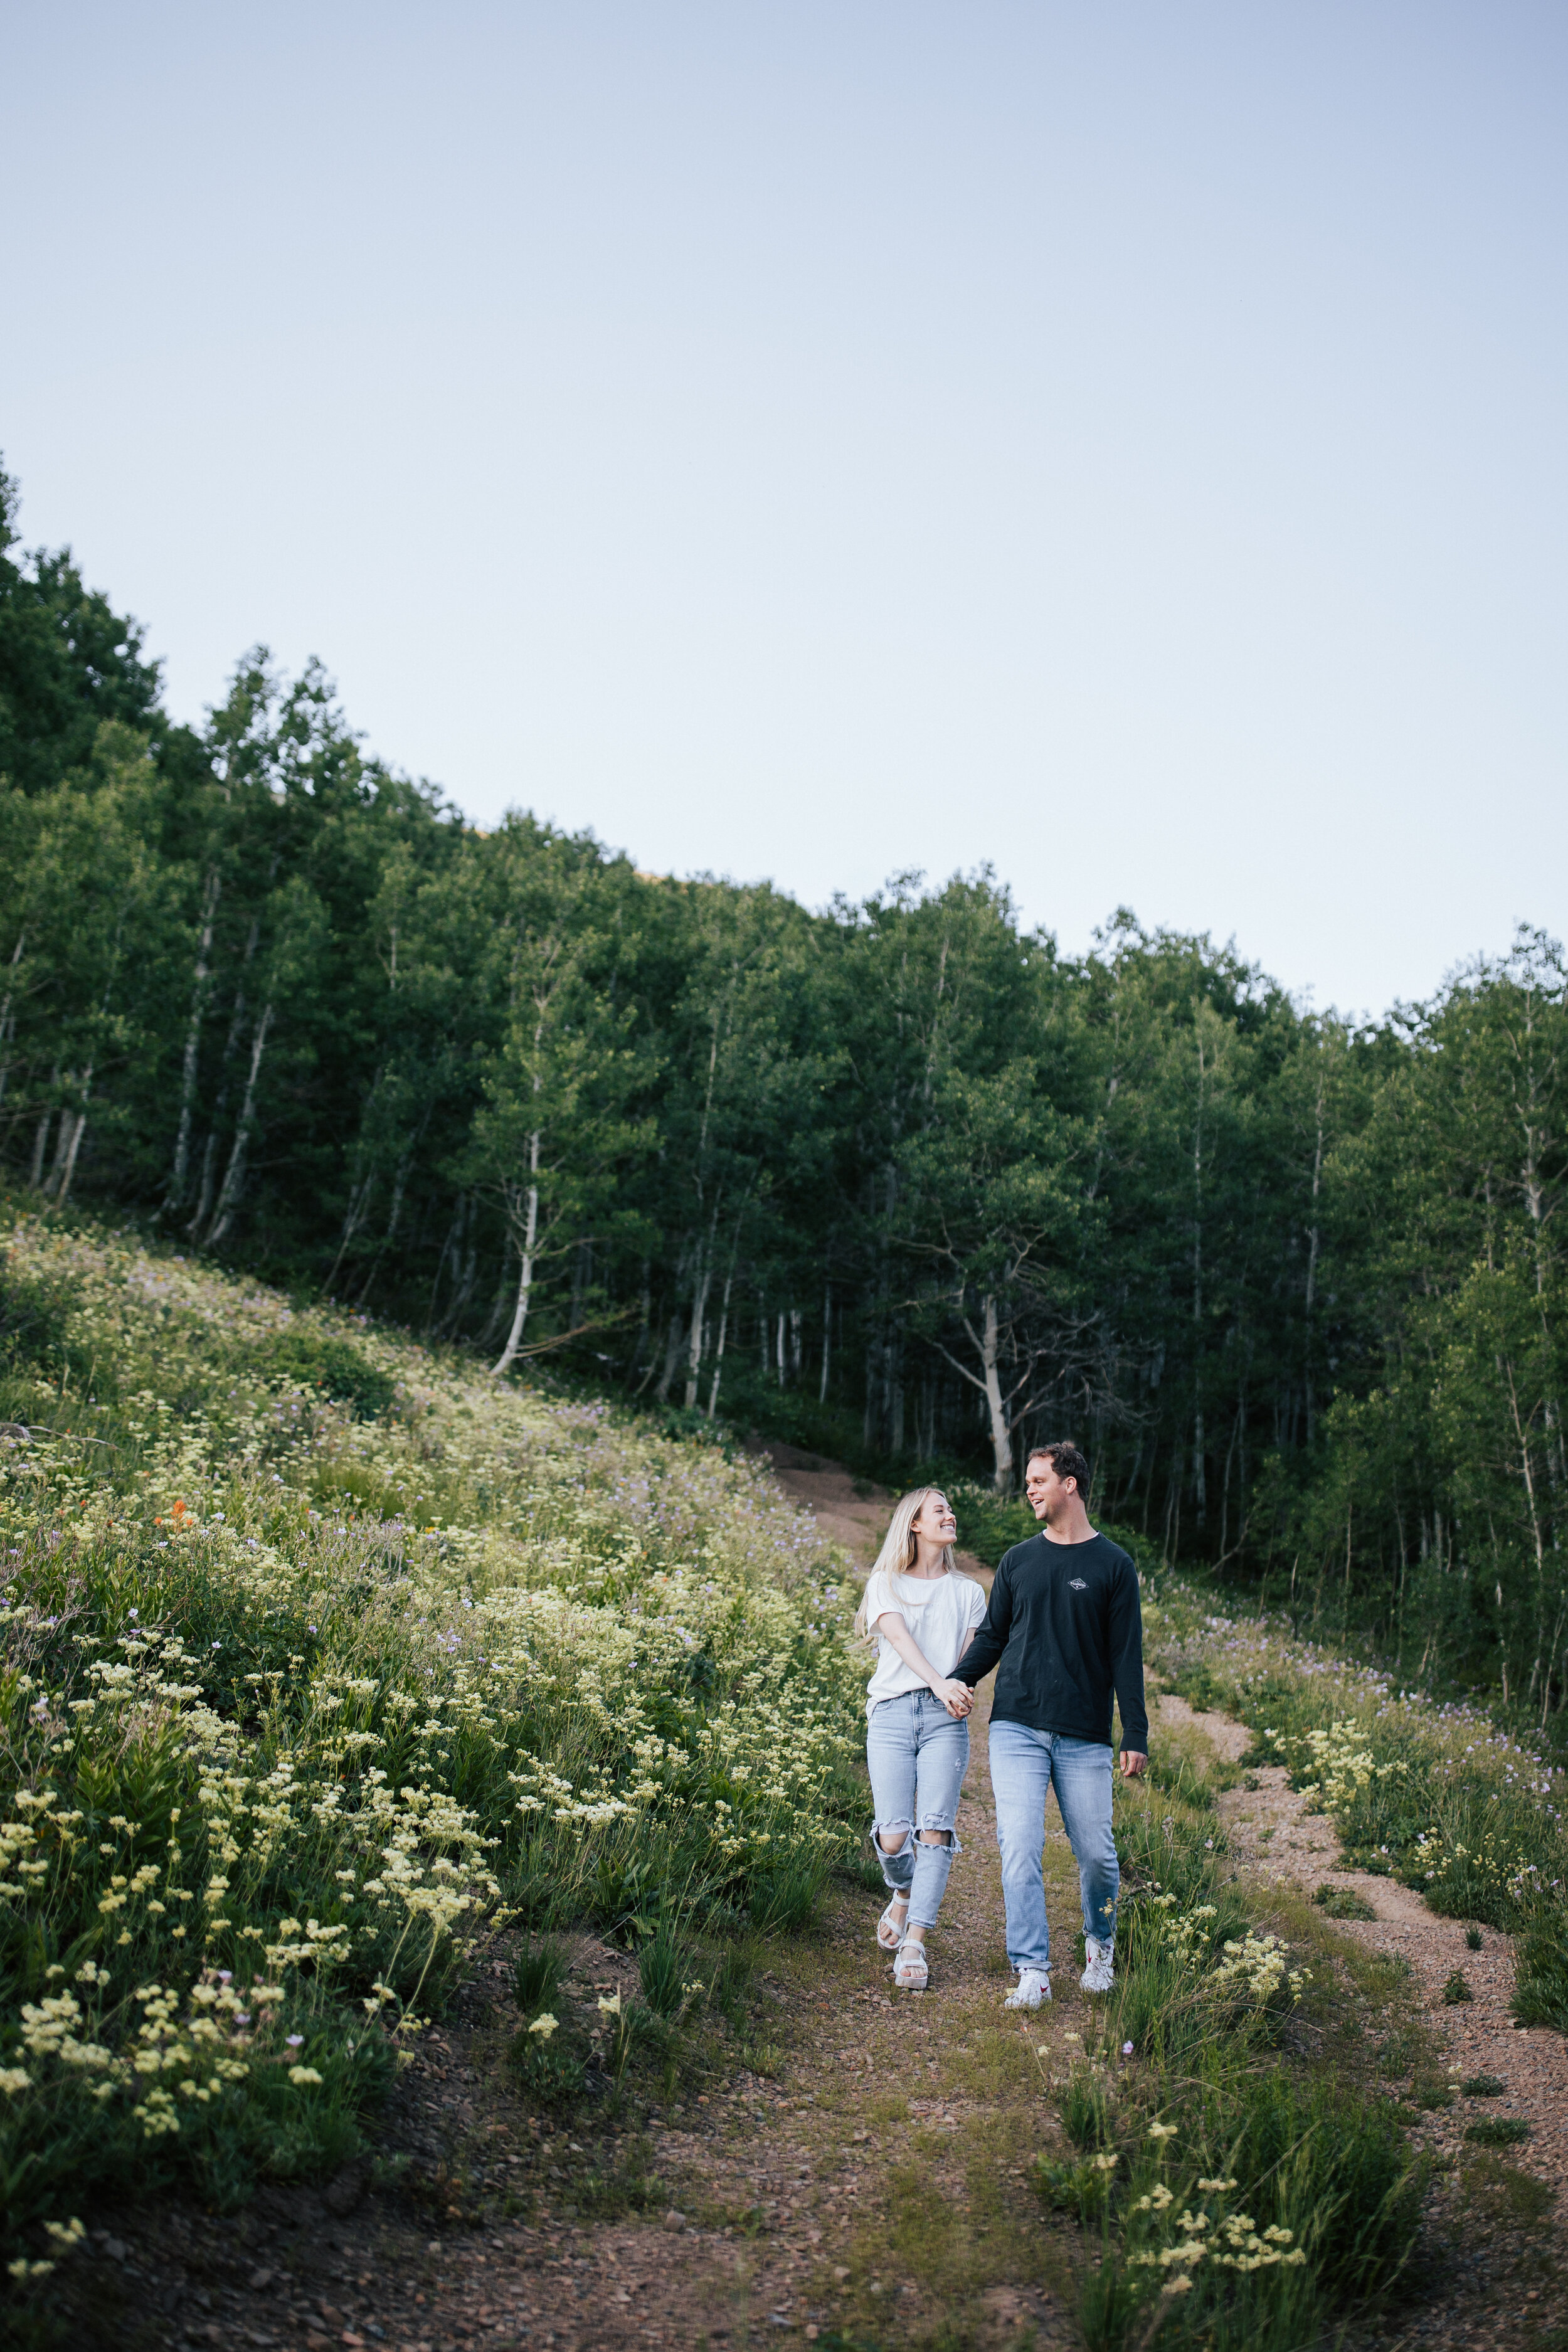  Engagement session in wildflowers in the mountains near Park City, Utah. Summertime engagement photos with mountain views. Engaged couple walk together in the mountains. Outfit inspo. Engagement outfits. #engagementphotos #engagements #weddingphotog